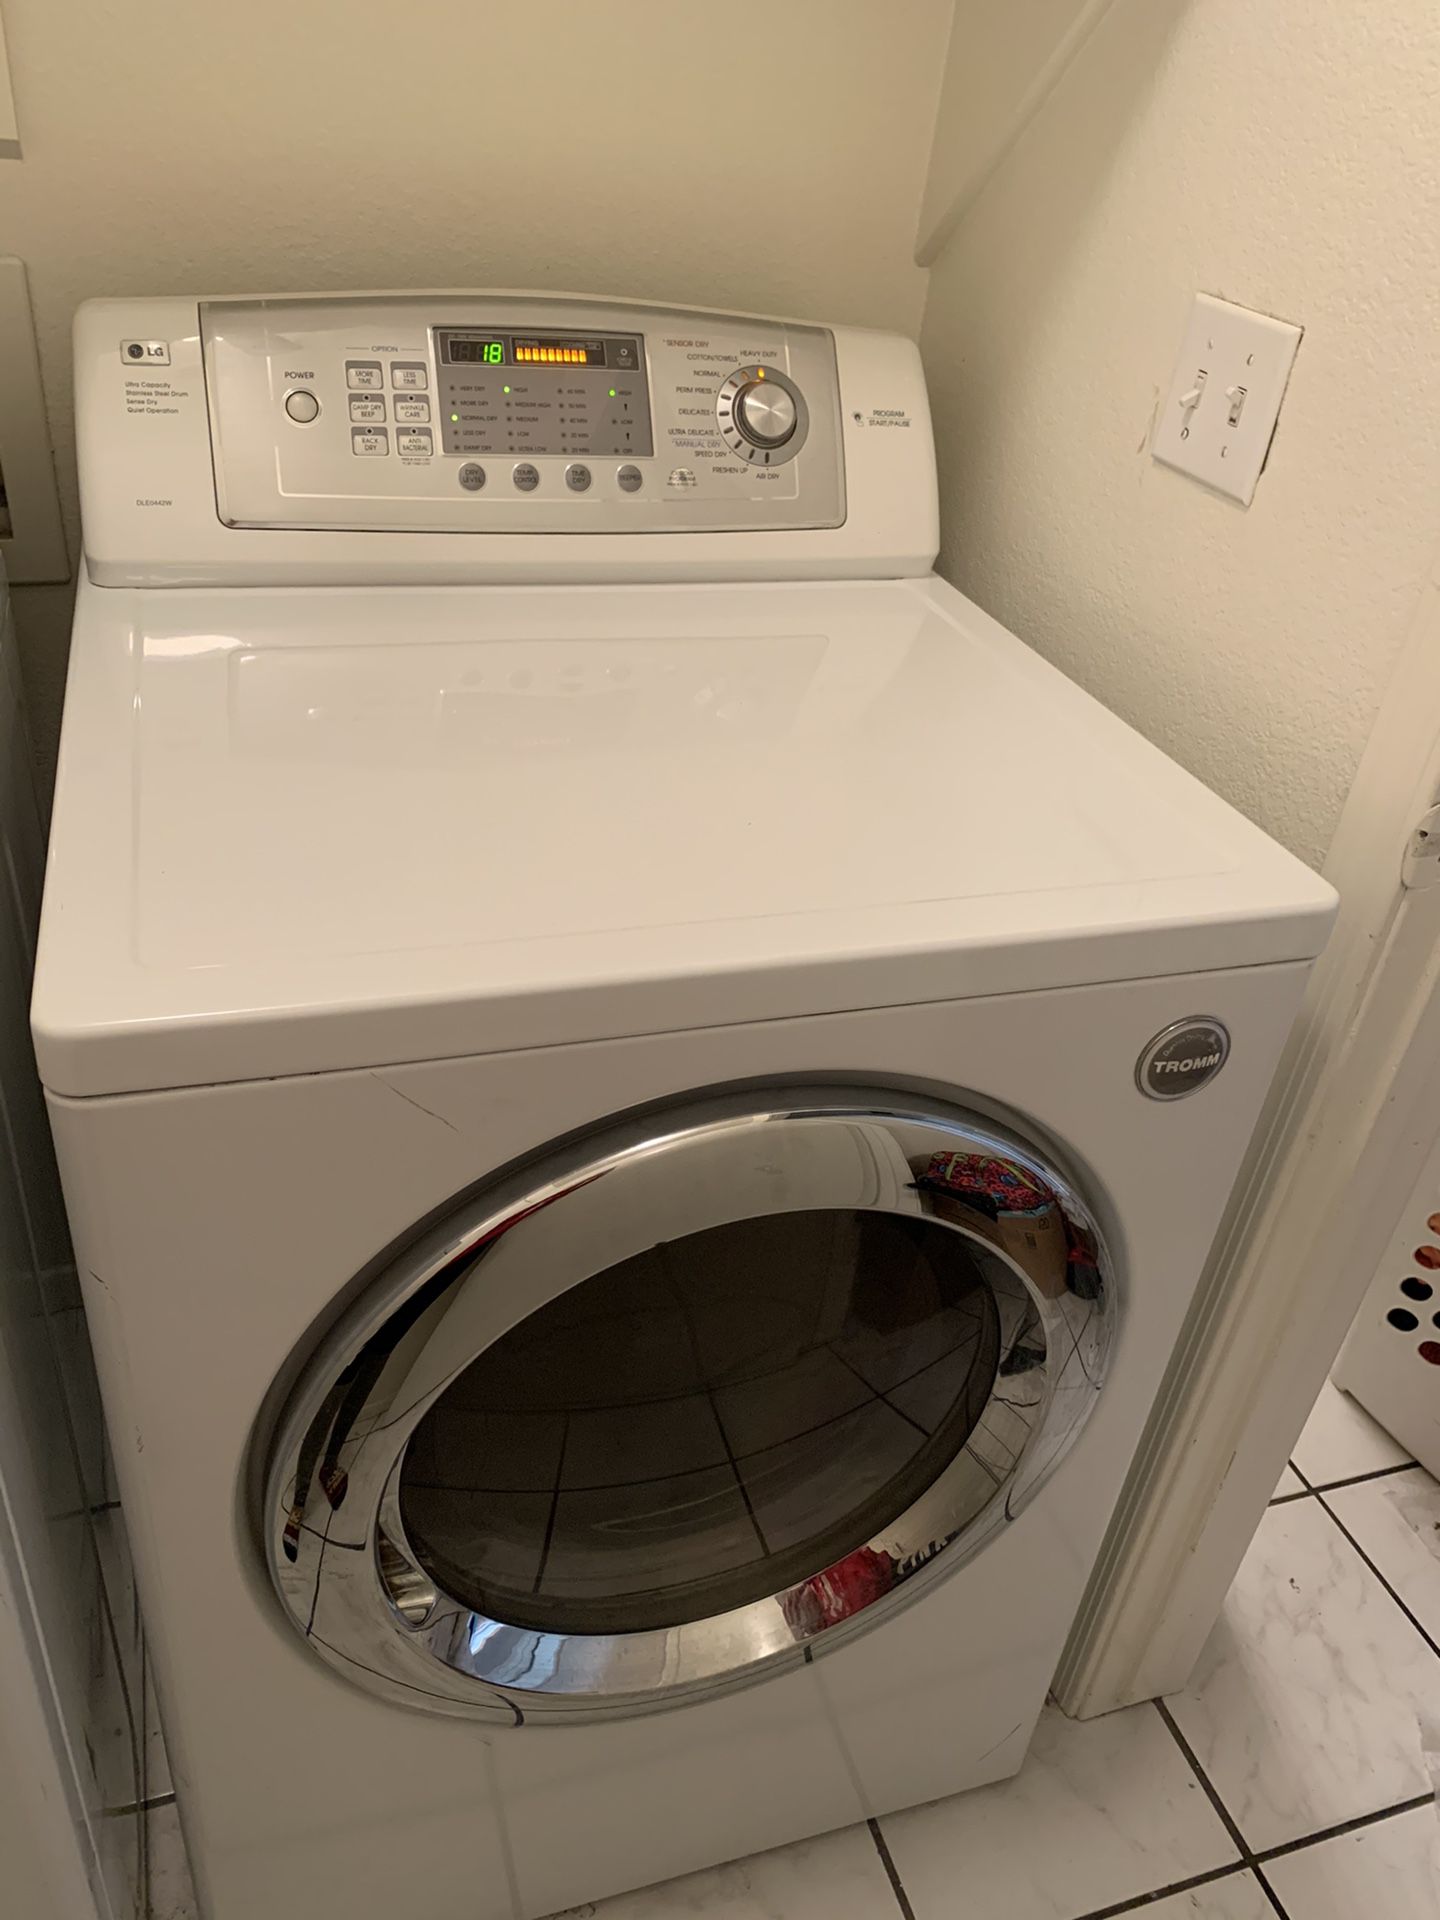 Washer and Dryer (brand: Tromm)